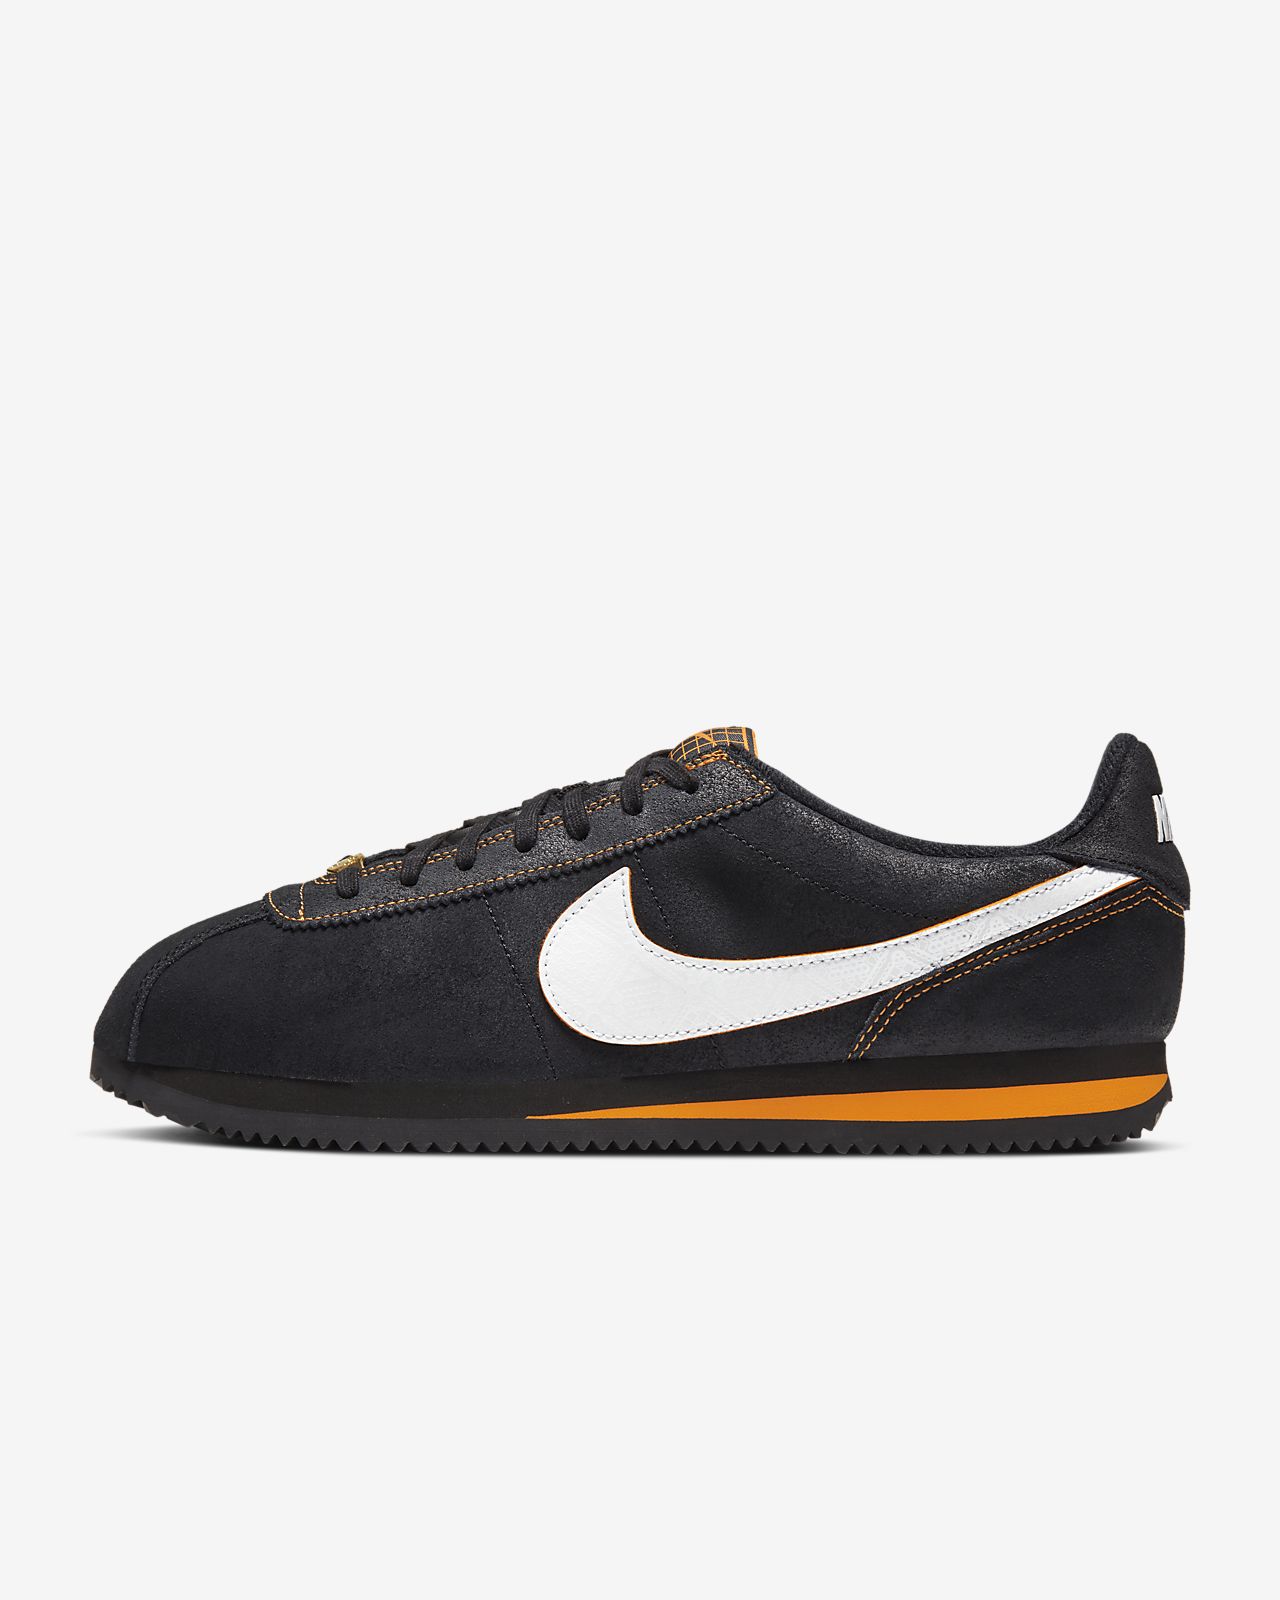 nike cortez day of the dead for sale